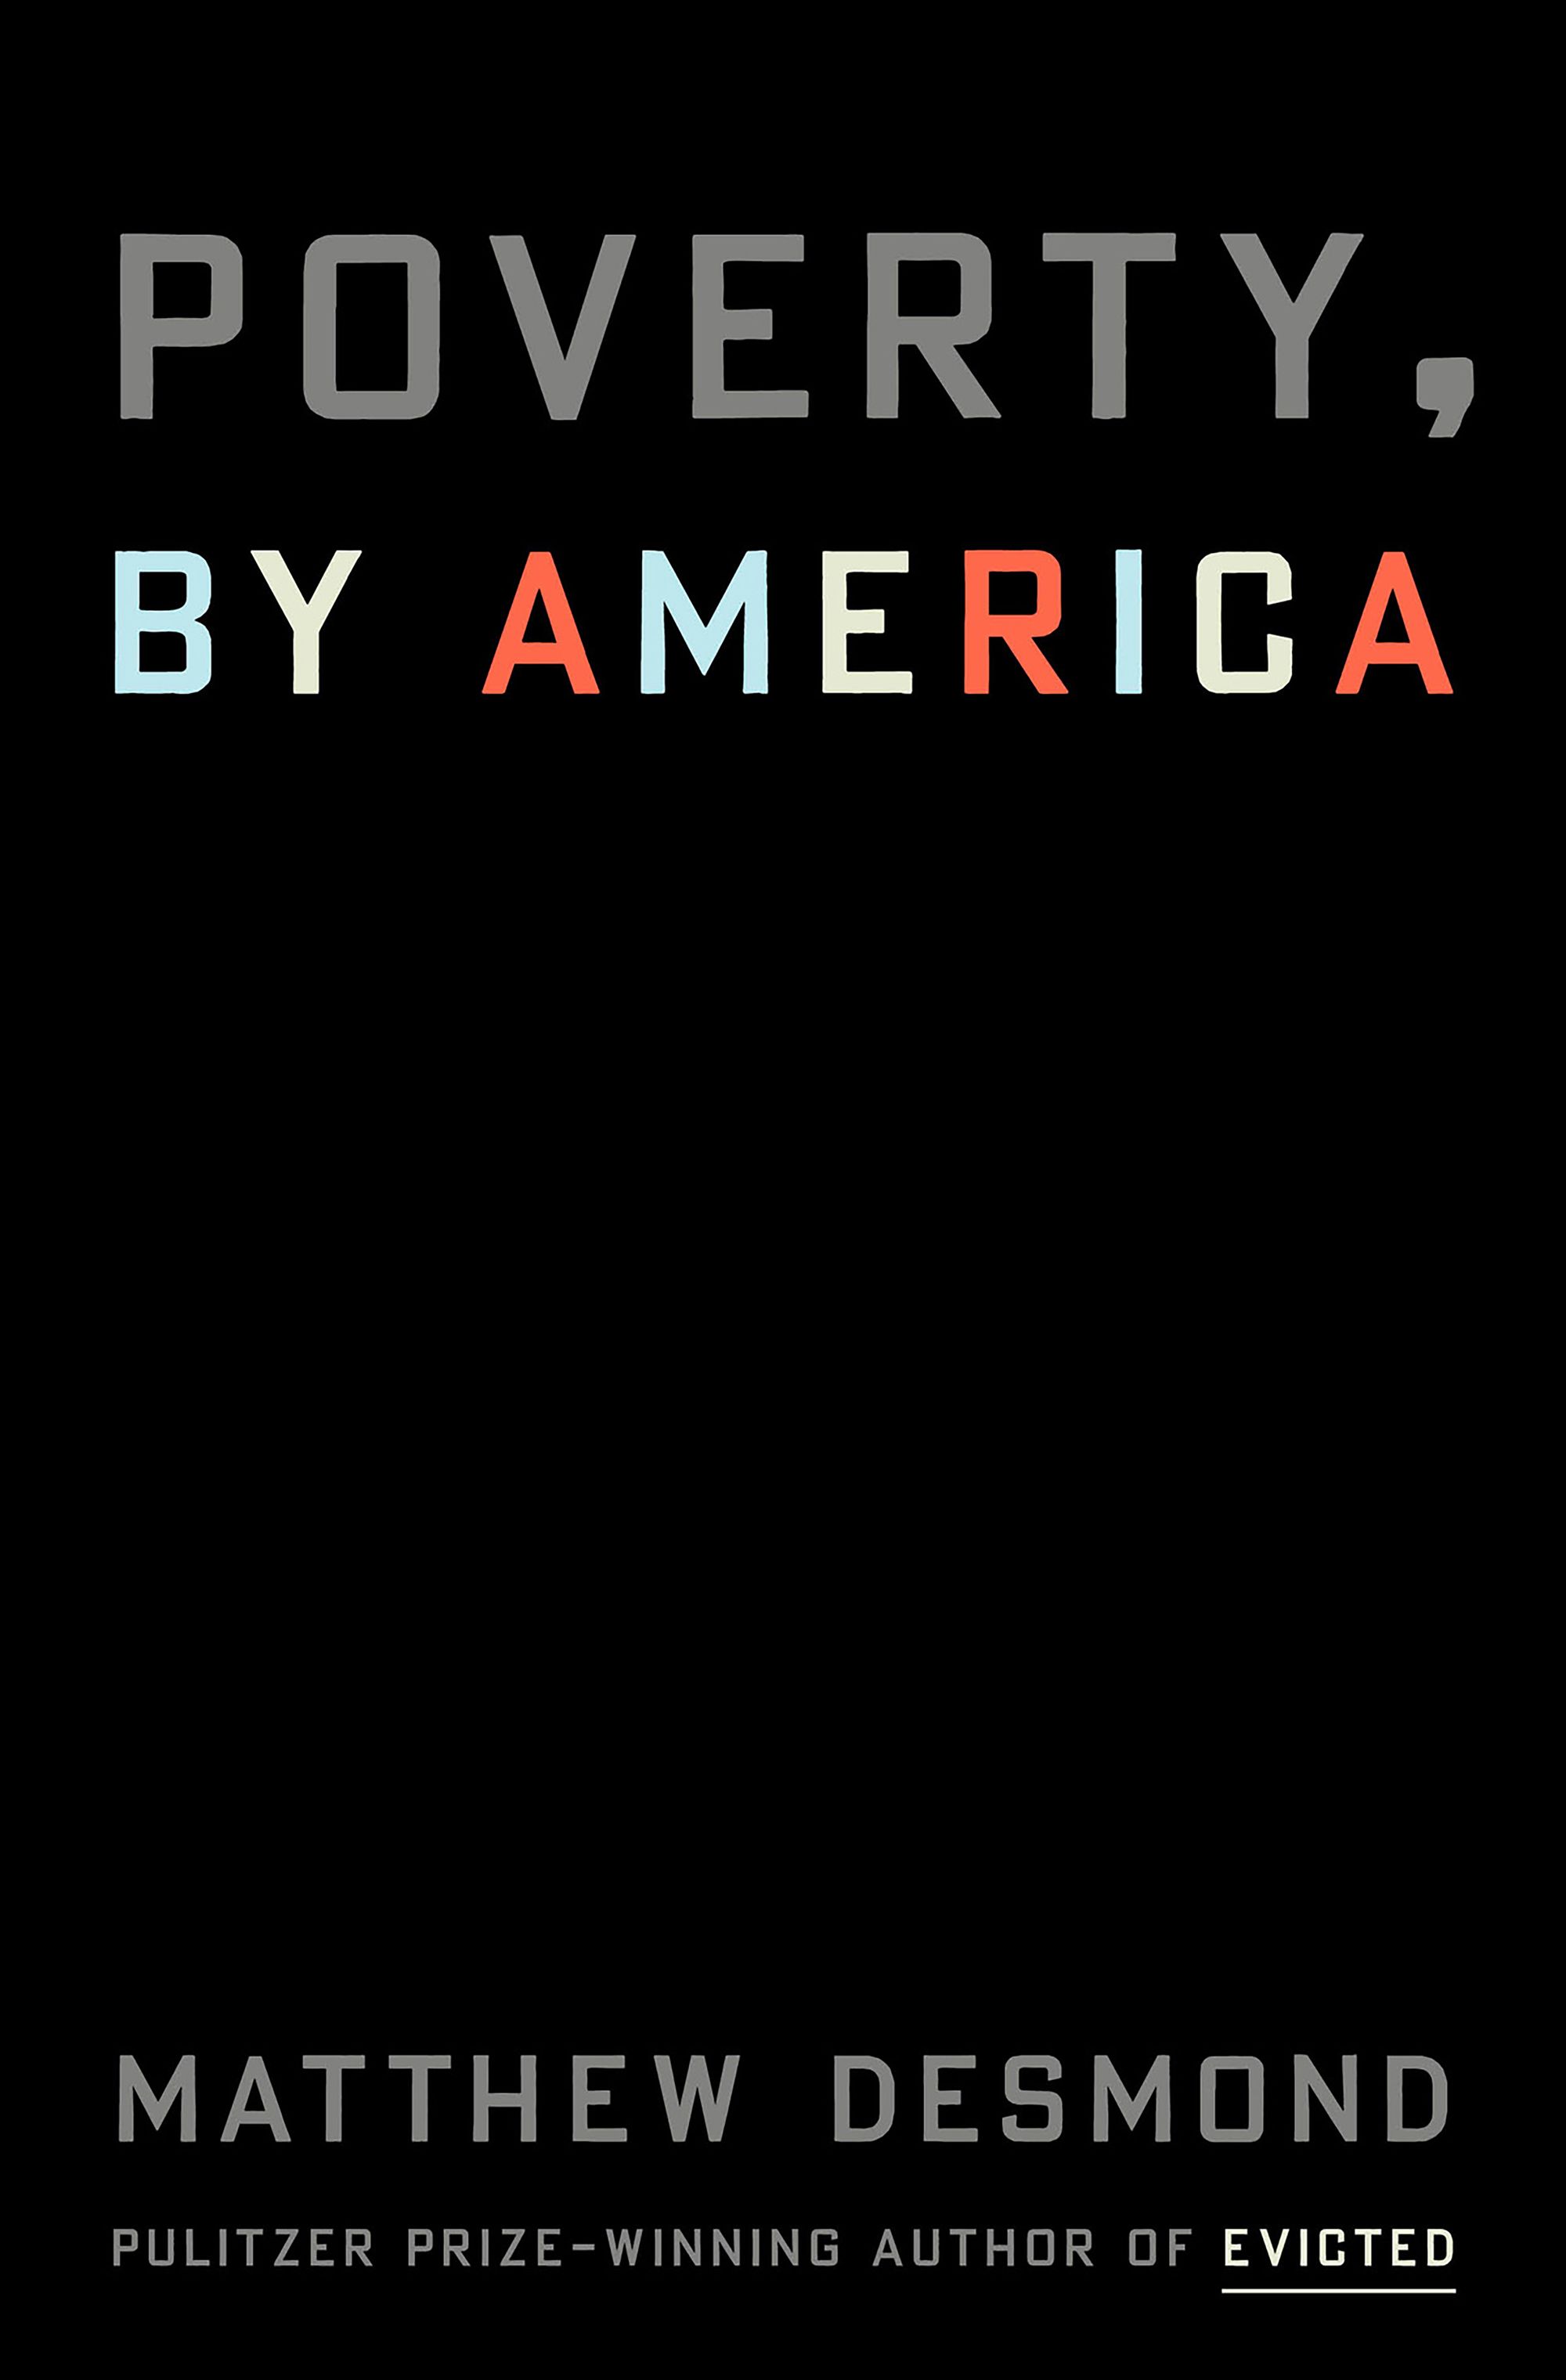 The book cover for Poverty by America by Matthew Desmond